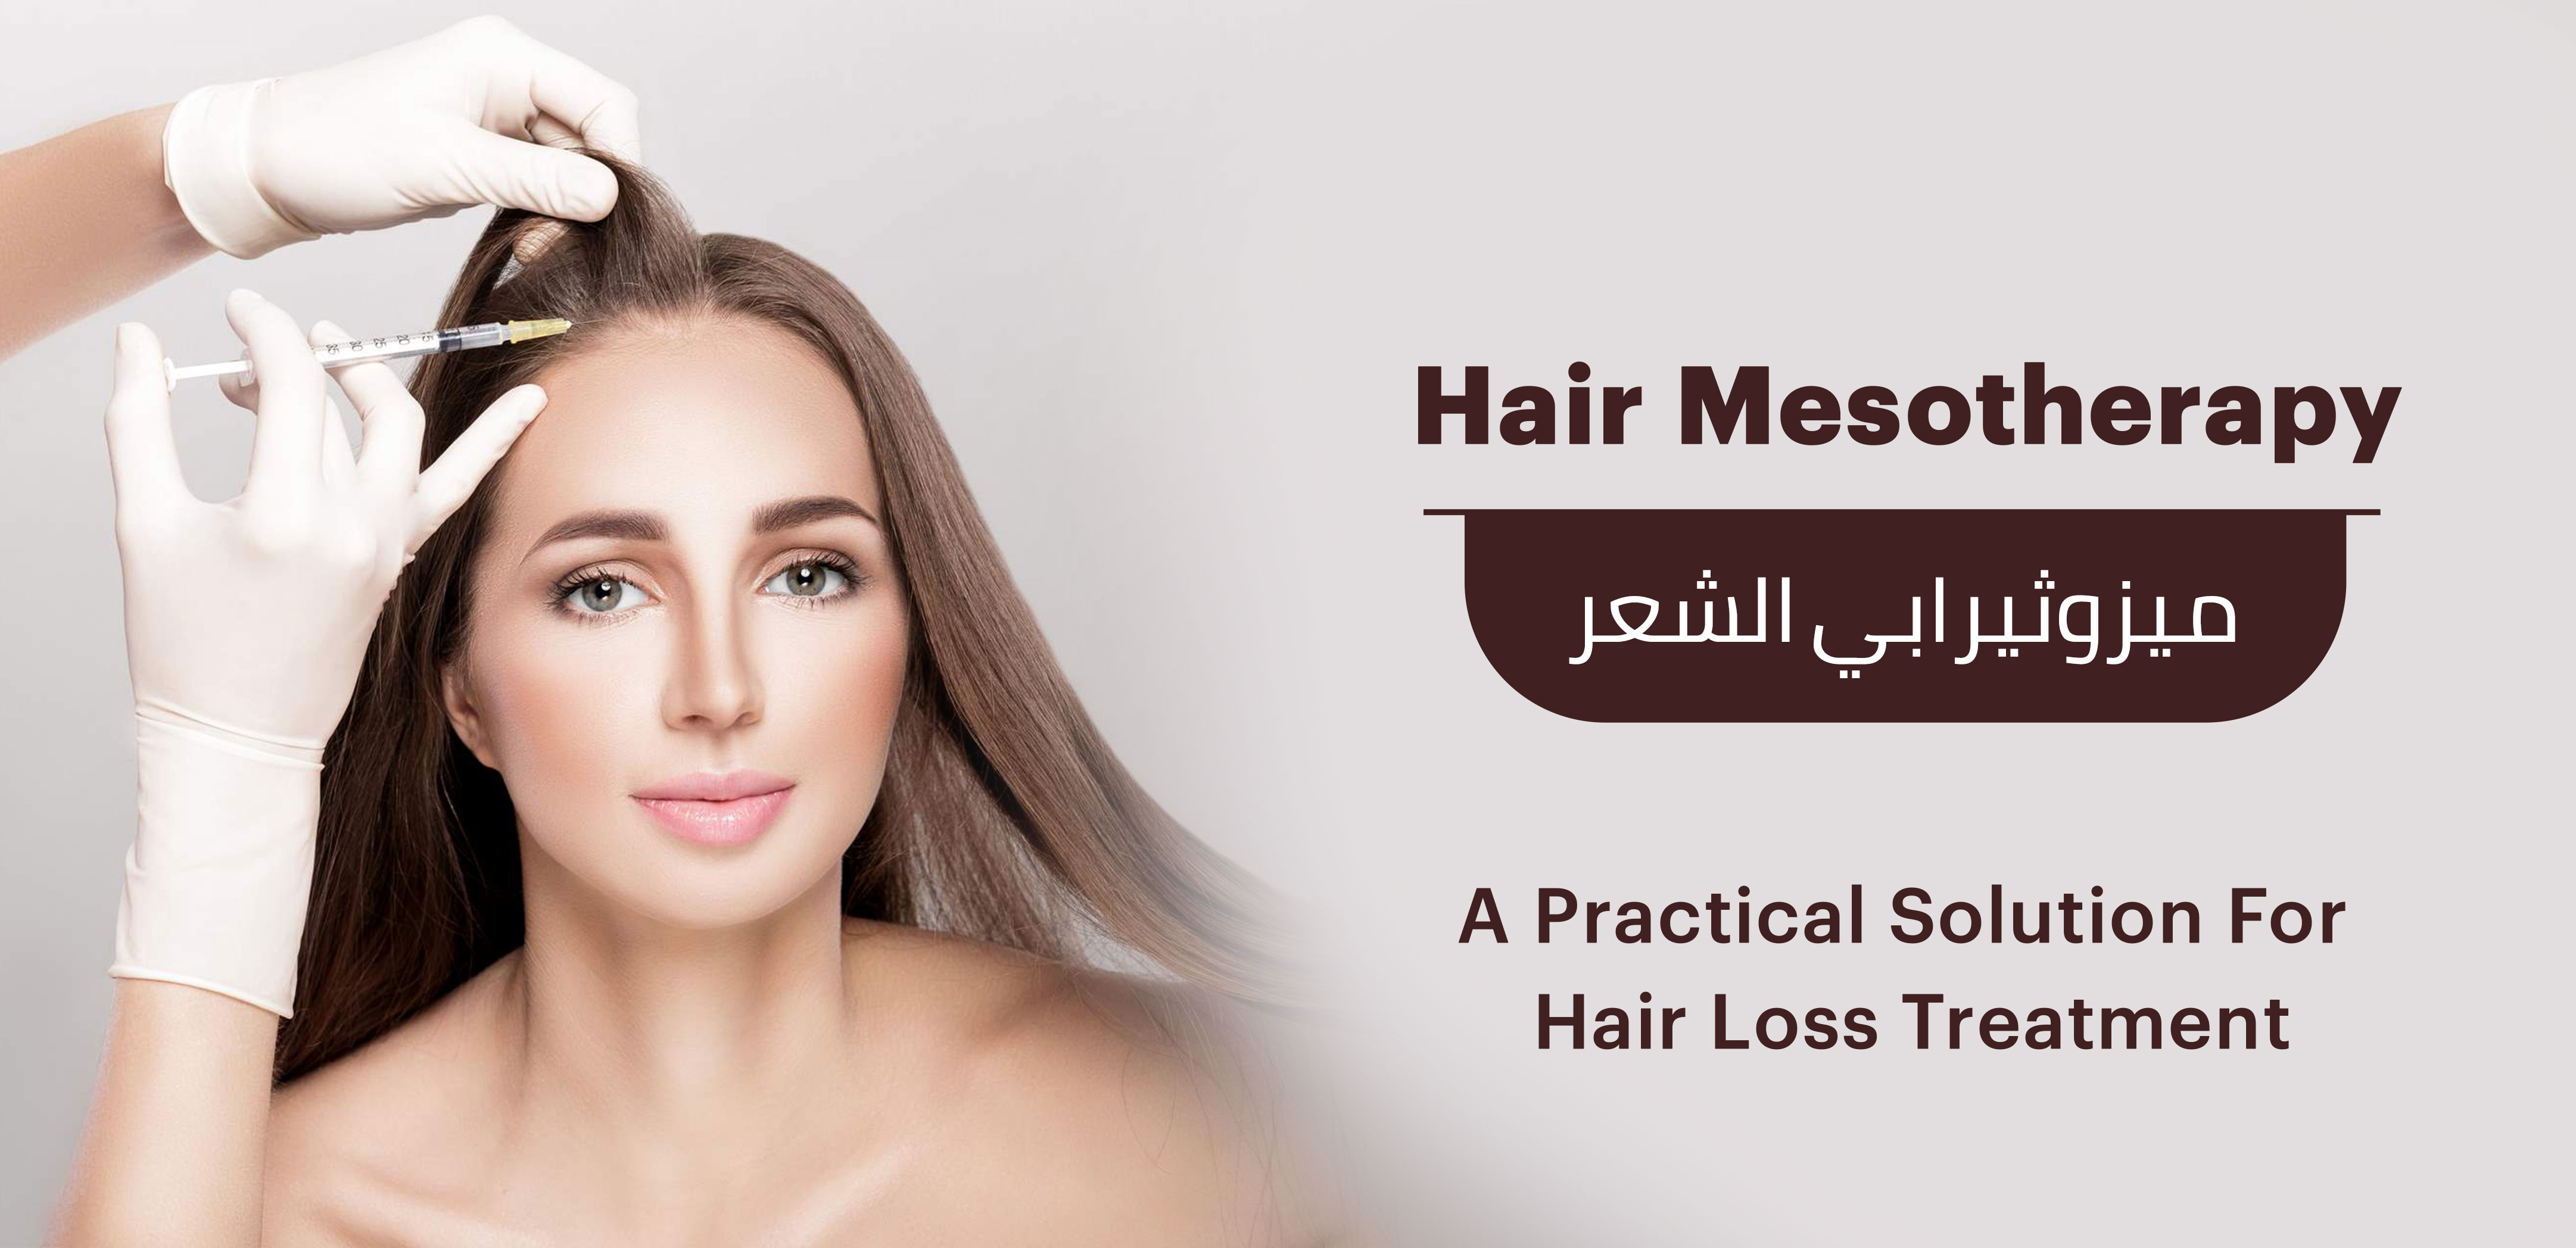 WHAT IS HAIR MESOTHERAPY?